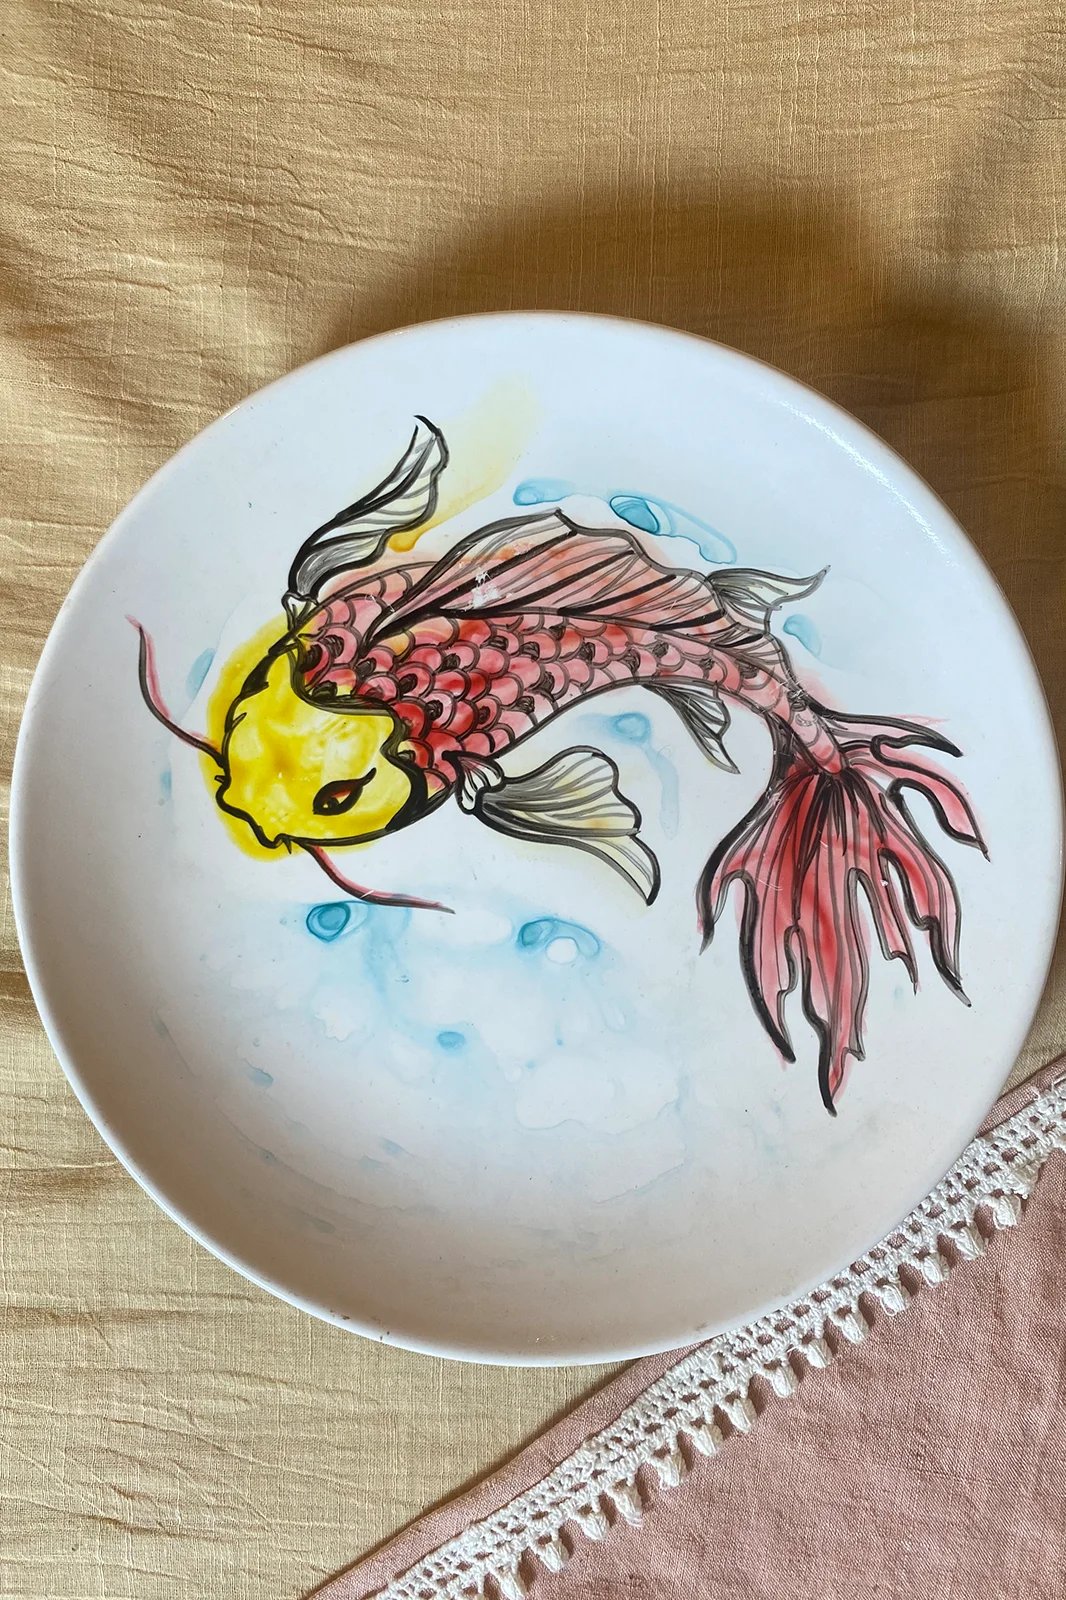 Koi fish ceramic plate set of 2, hand painted plate, ceramic plates, handmade ceramic plates, handpainted ceramic plates, ceramic plates set, painted plate, painted plate set, dinner ceramic plates, ceramic plates online, ceramic plates online India, decorative ceramic plates, jack of all, Sepia stories